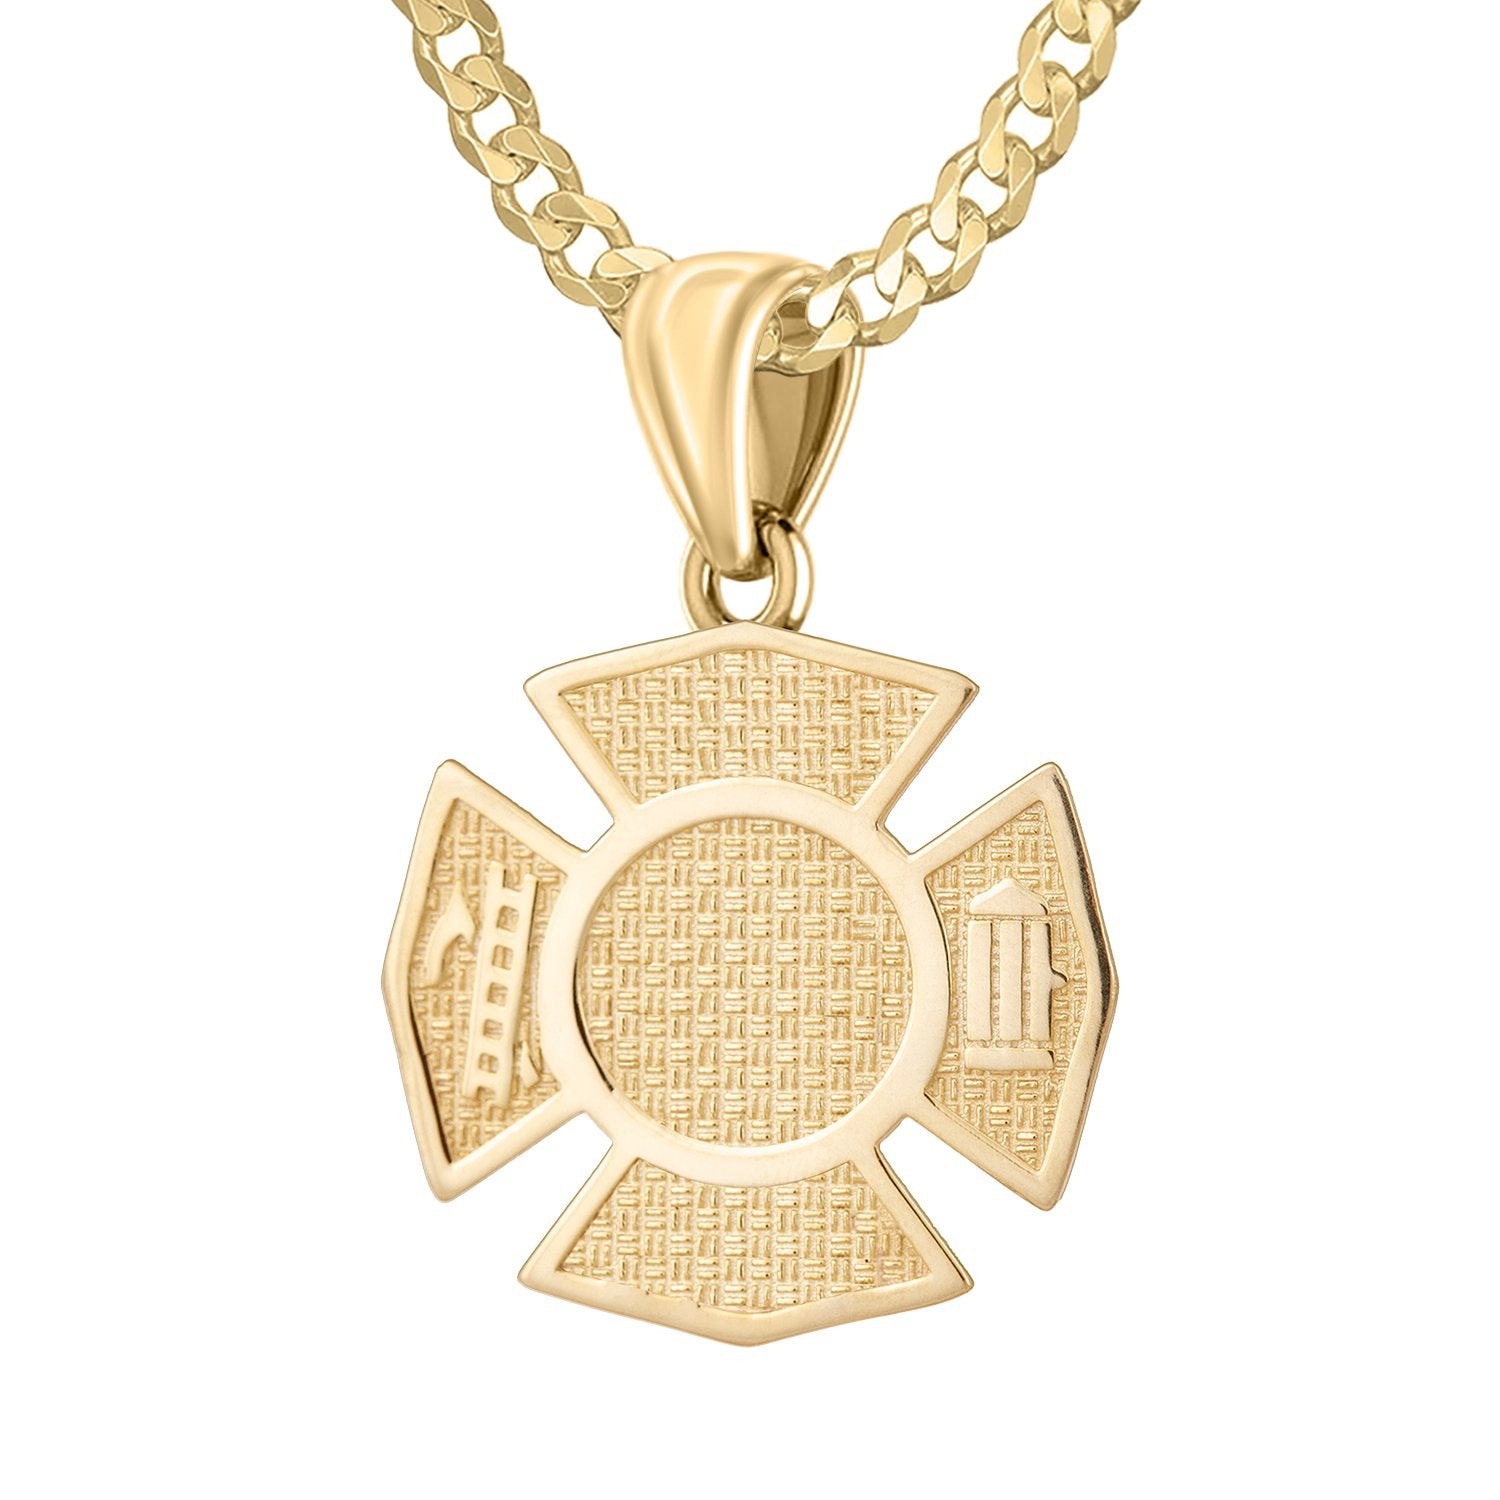 Firefighter Pendant In Gold For Men - 2.6mm Curb Chain